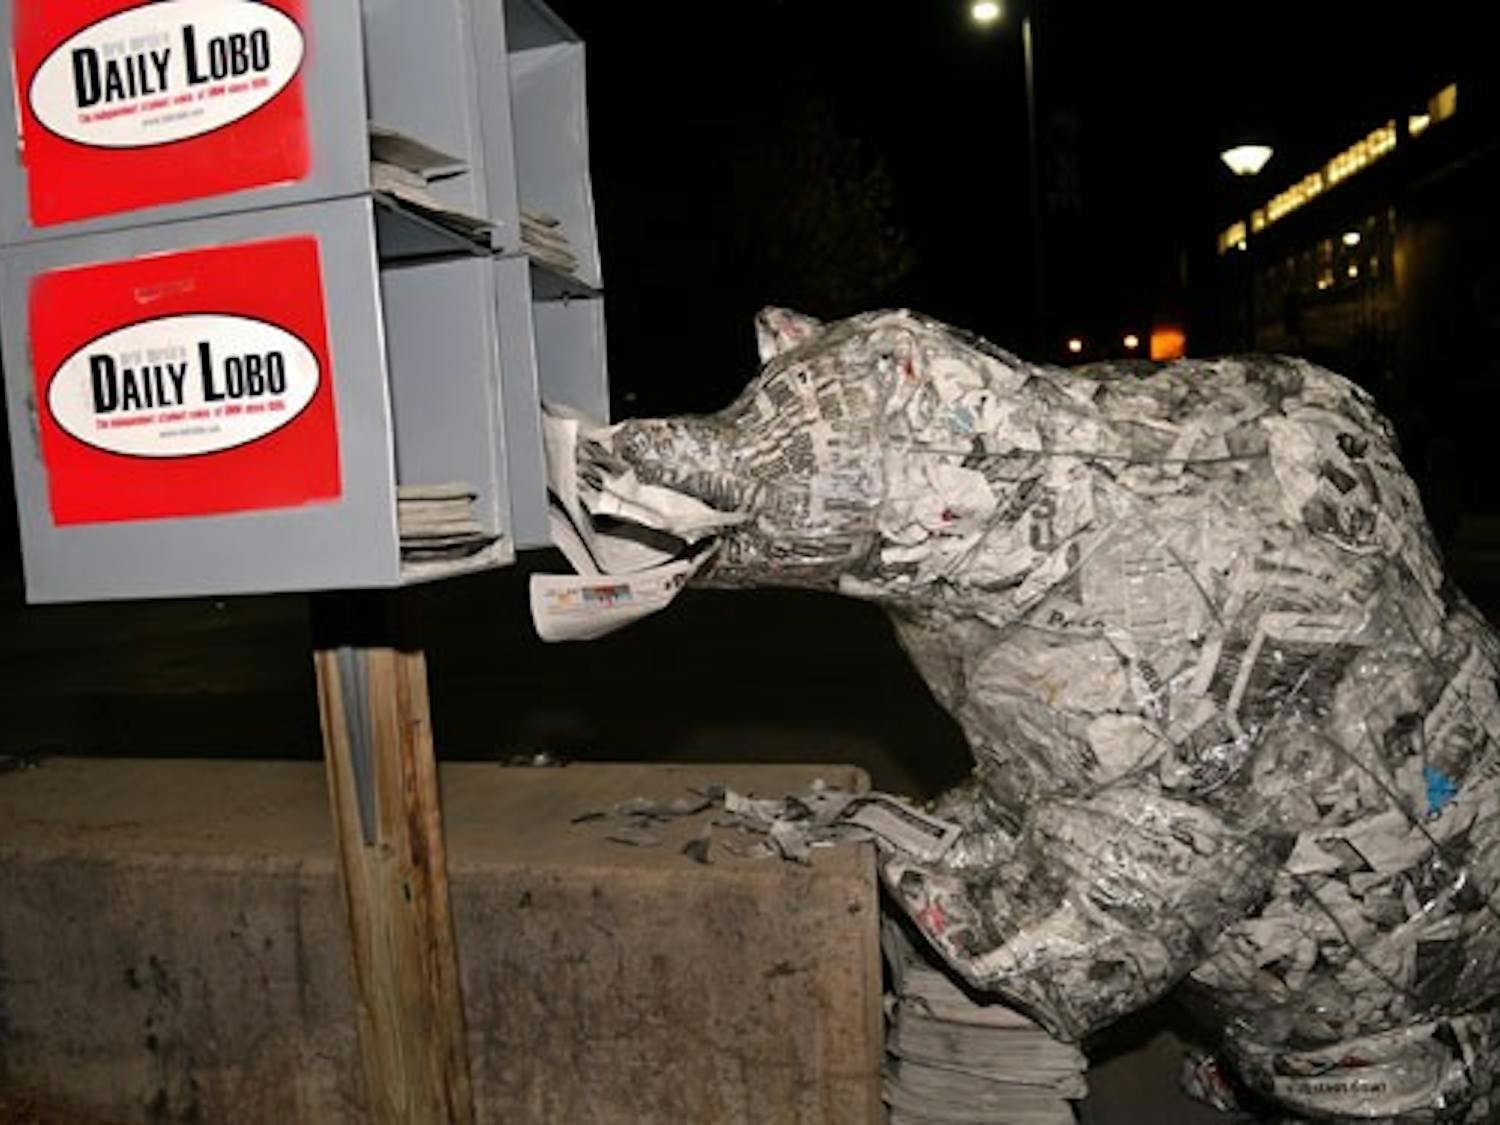 A bear, sculptured out of copies of the Daily Lobo, munches on newspapers outside the Bookstore on Wednesday. The sculpture had no label indicating artist or title.   